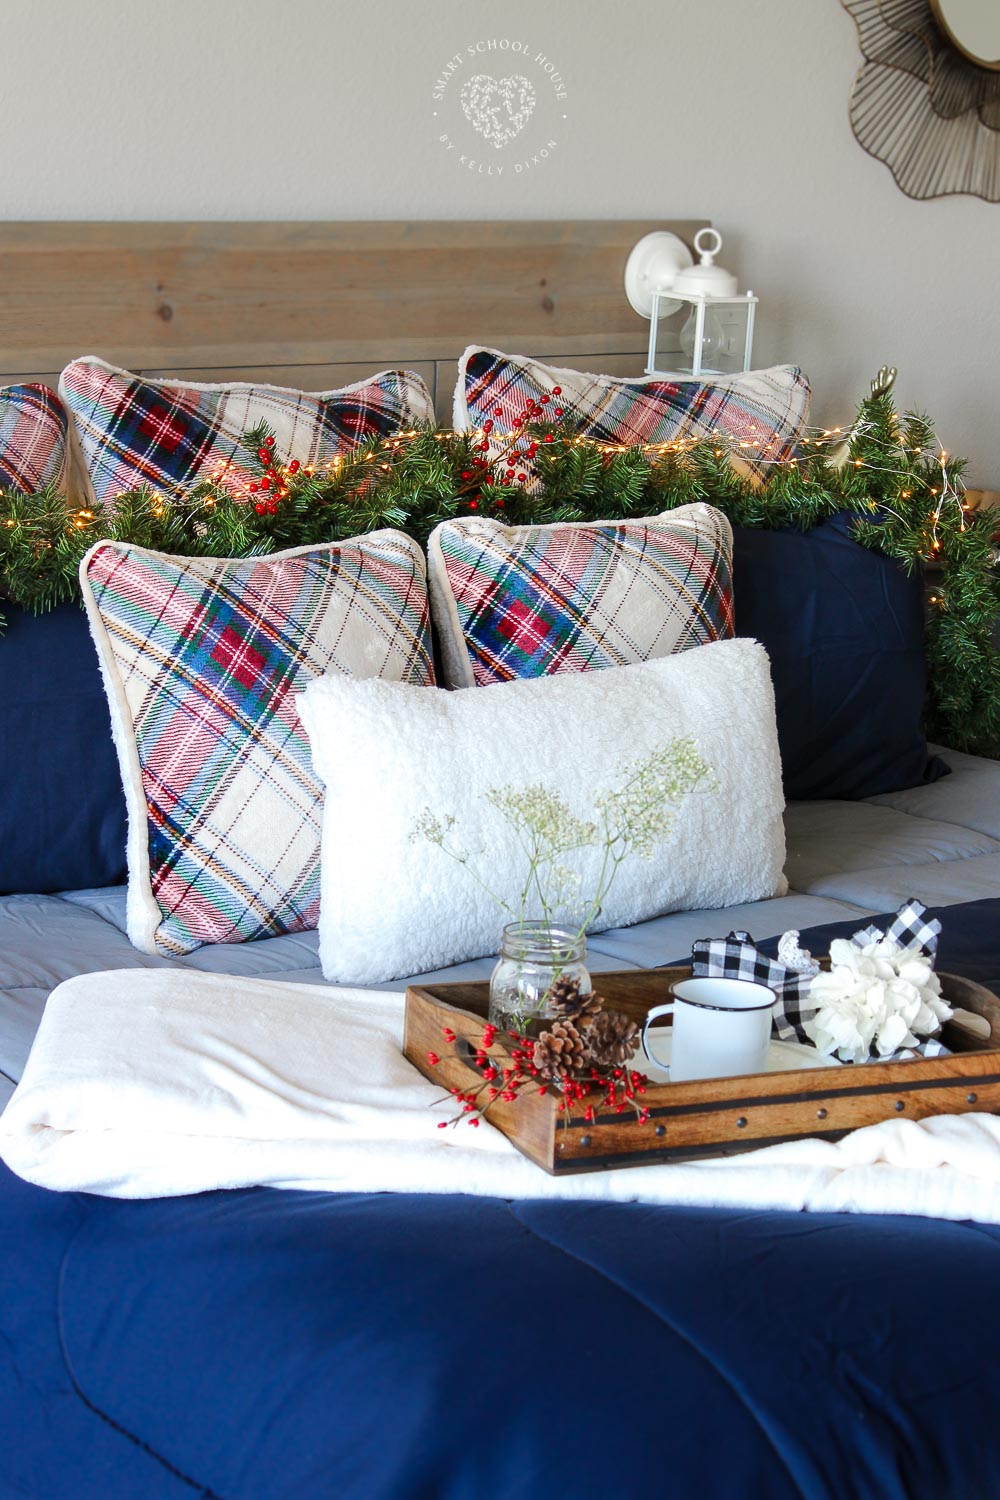 How to decorate a bed for the holidays. Plaid pillows, garland, lanterns, and fairy lights. Cozy Holiday Bedding. 